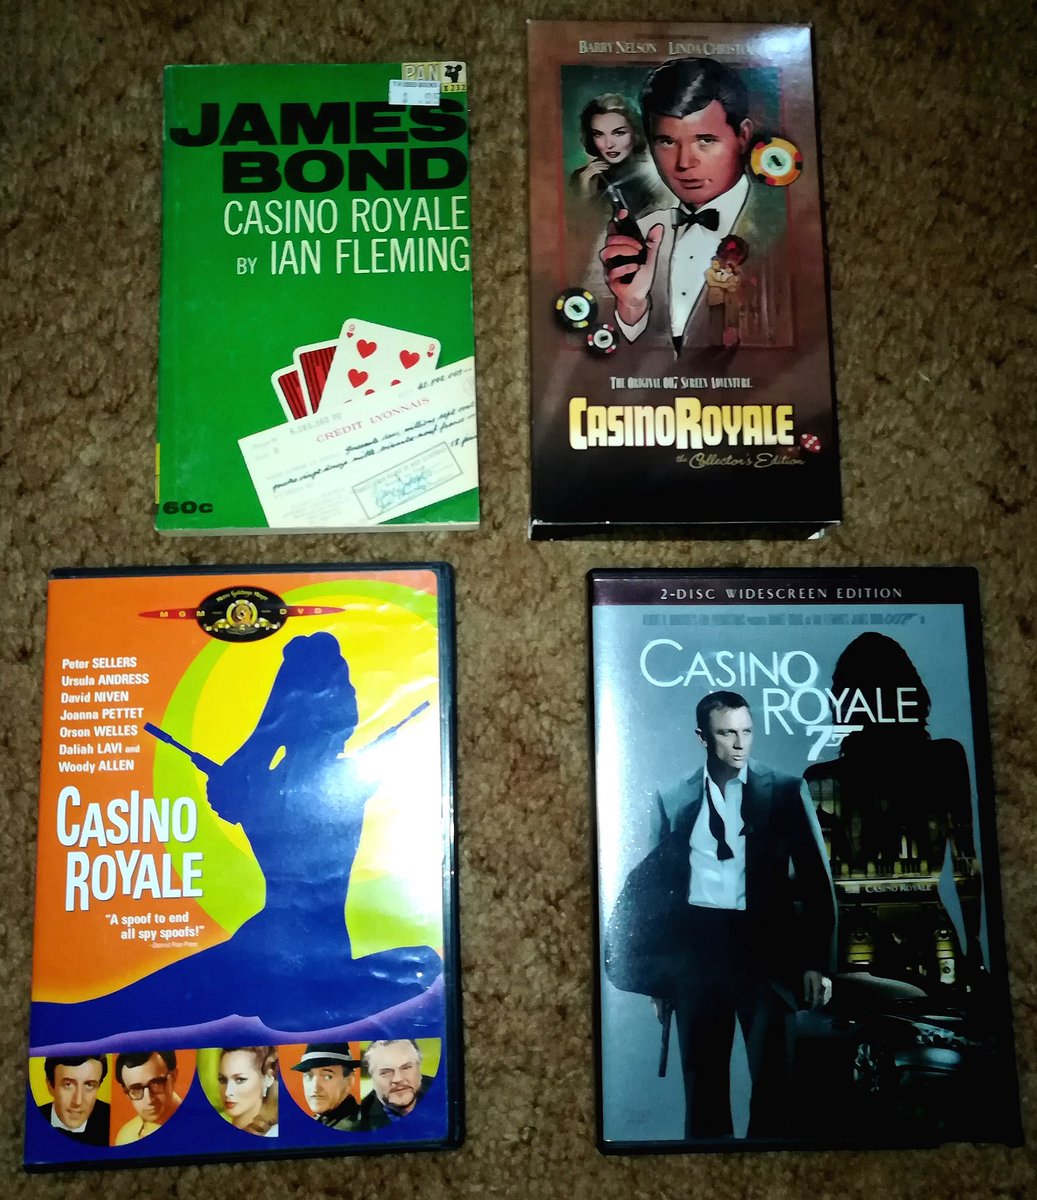 4 ways to indulge in #JamesBond's Casino Royal. Most people don't know that the true original #007Flick is Barry Nelson as Bond in the 1954 Casino Royal. I think these may be in my watch list on my #BondMarathon 2018 progress. 
#ClassicMovies #SpyNovels #MovieNight #FilmTalk